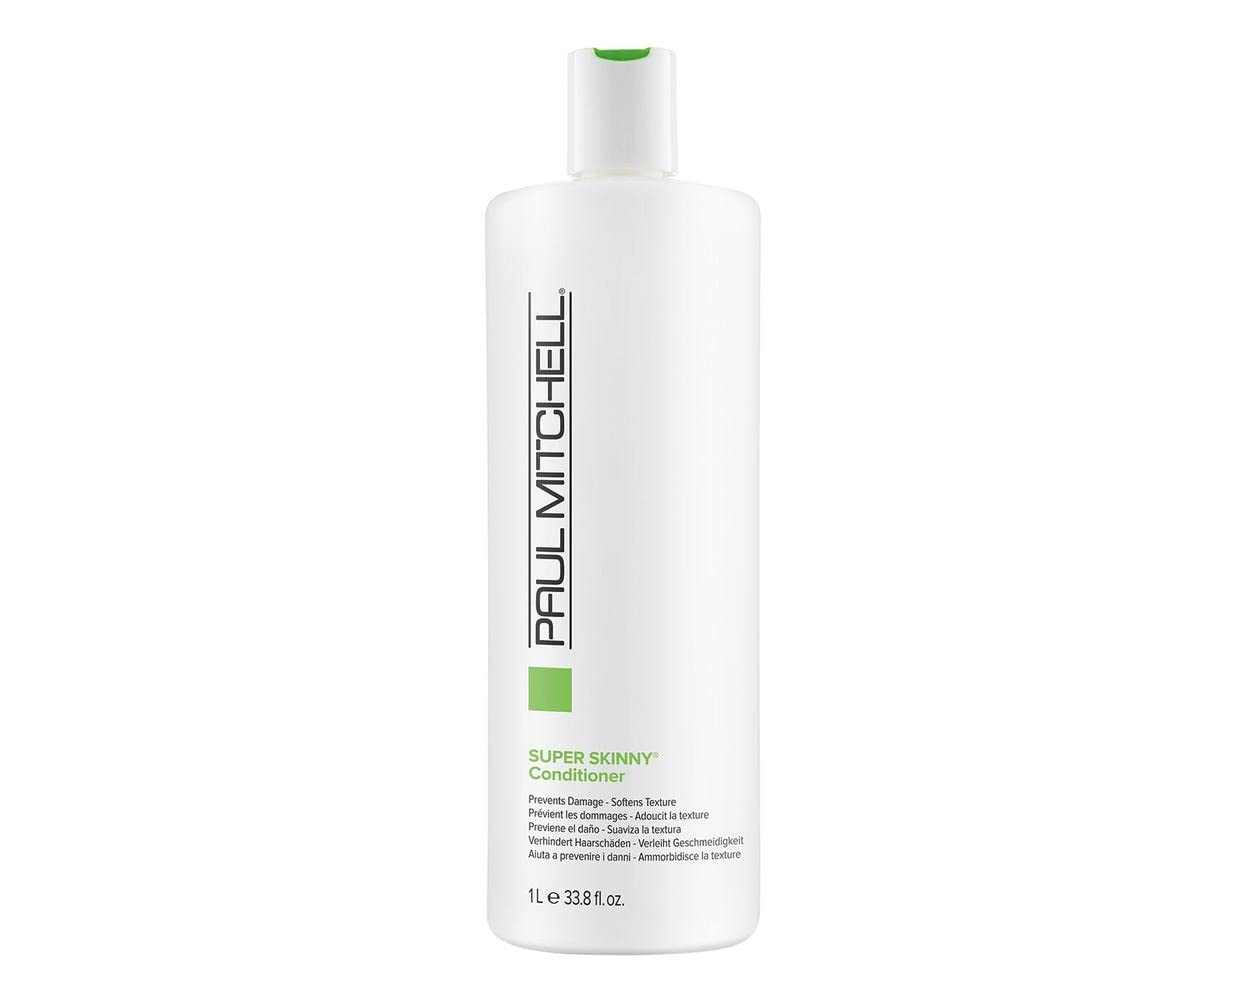 Paul Mitchell Super Skinny Conditioner, Prevents Damage, Softens Texture, For Frizzy Hair